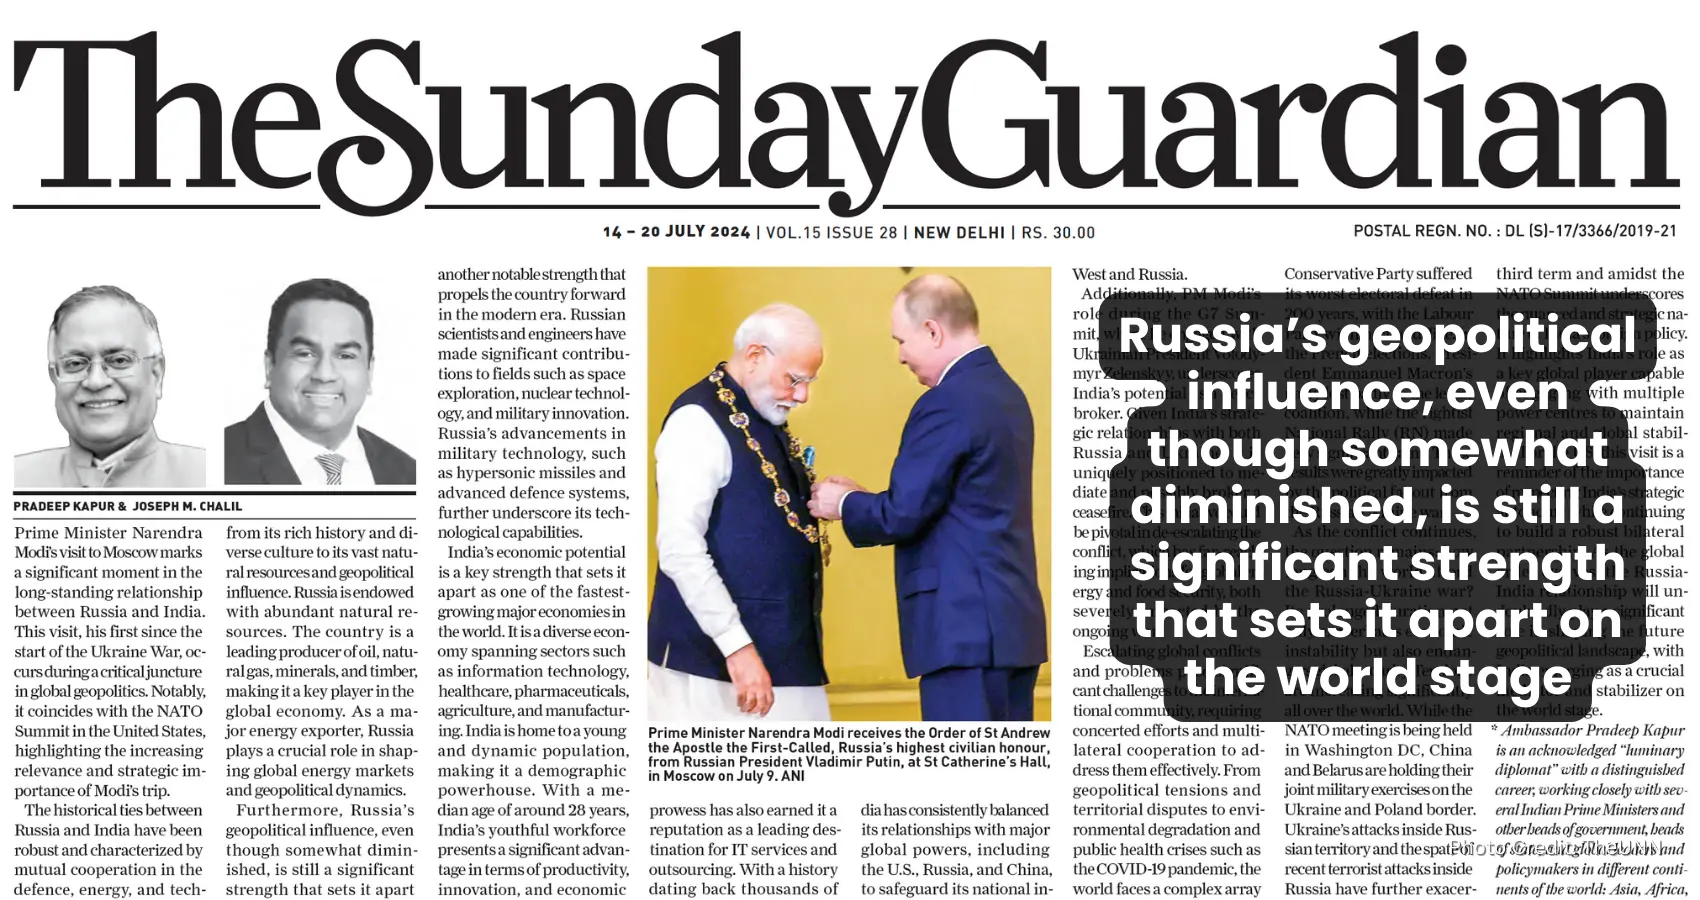 A New Chapter in Russia-India Relations: PM Modi’s Moscow Visit and Its Strategic Implications